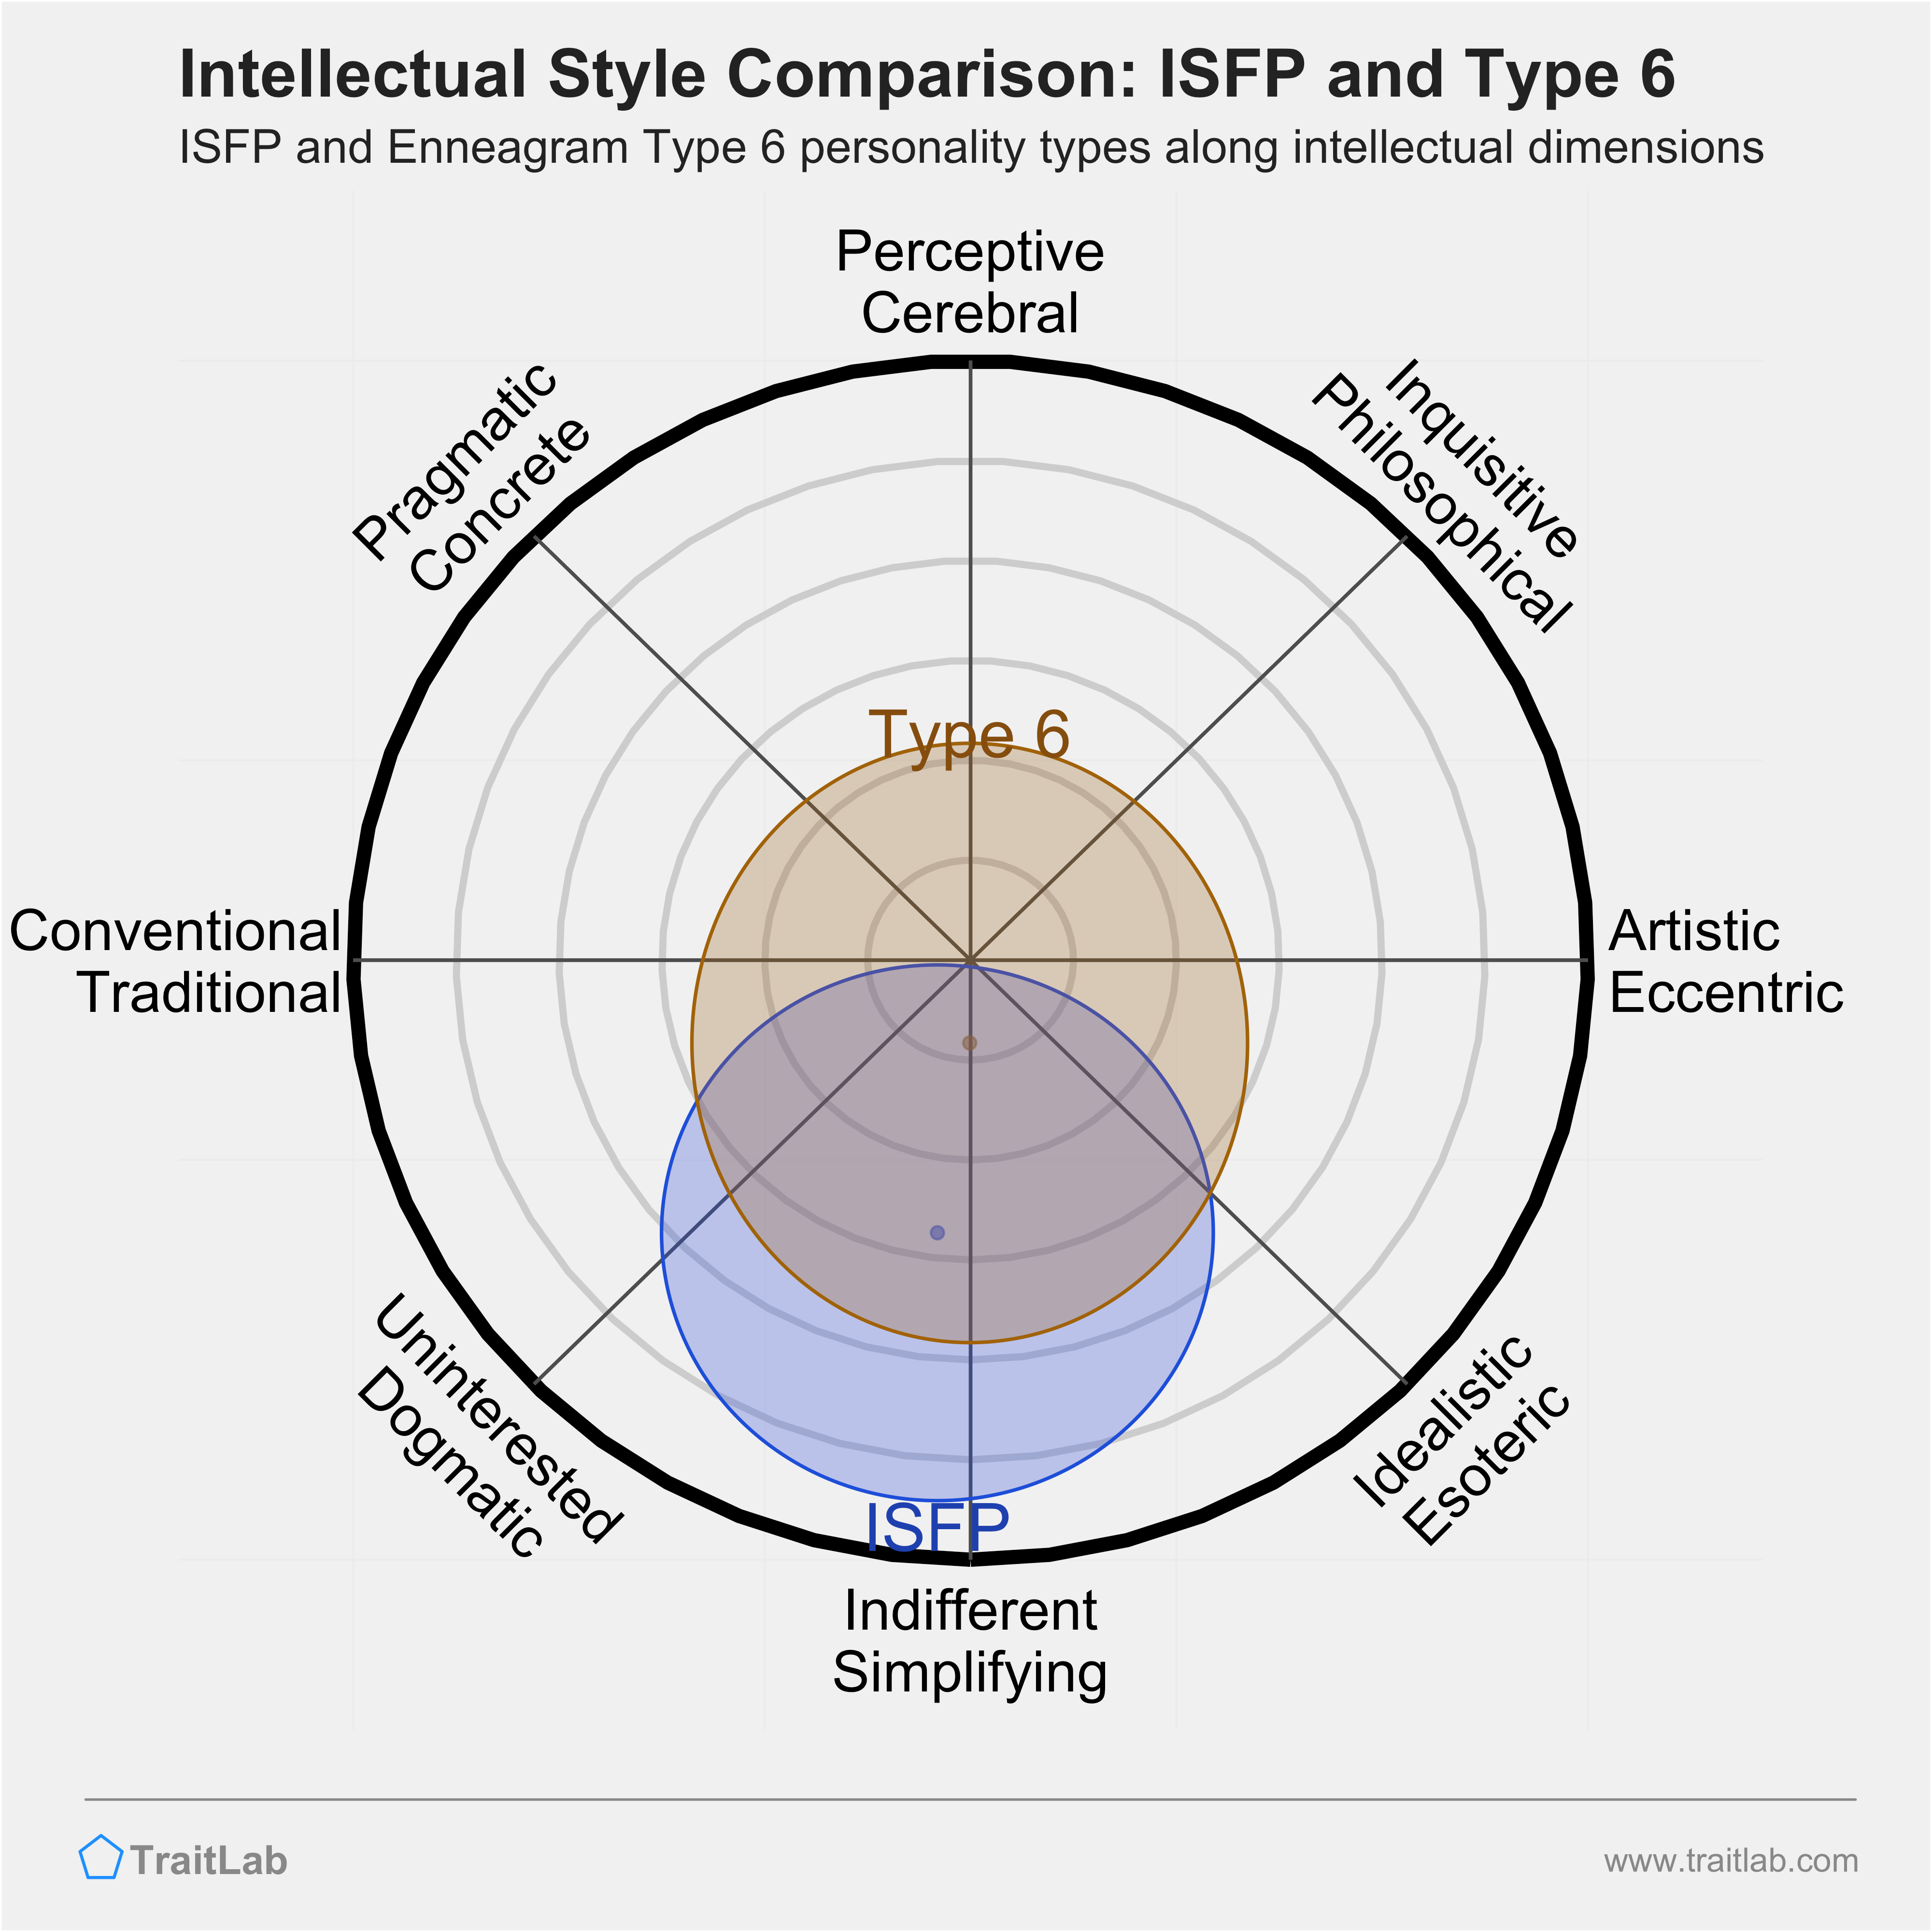 ISFP and Type 6 comparison across intellectual dimensions